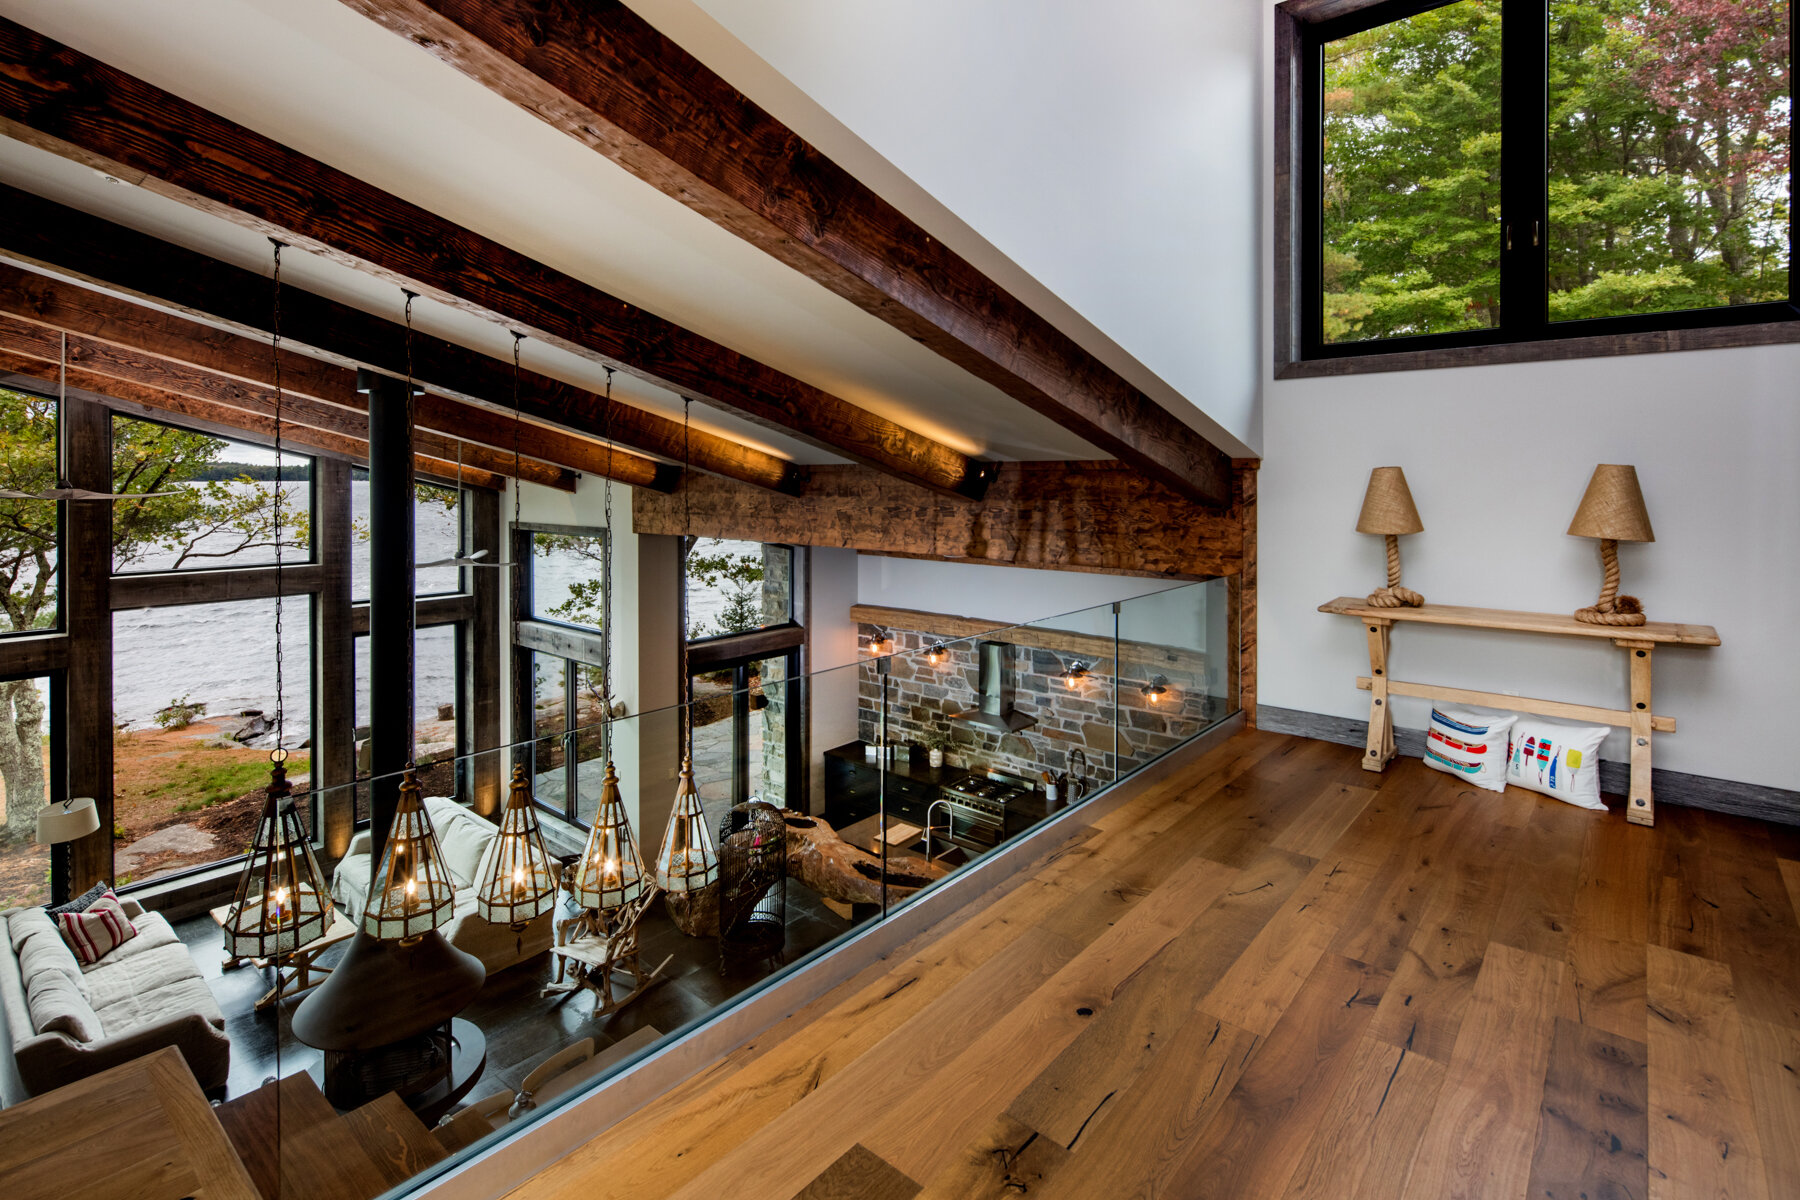 The Projects That Made Us: Contemporary Rustic on Muskoka Lake 4